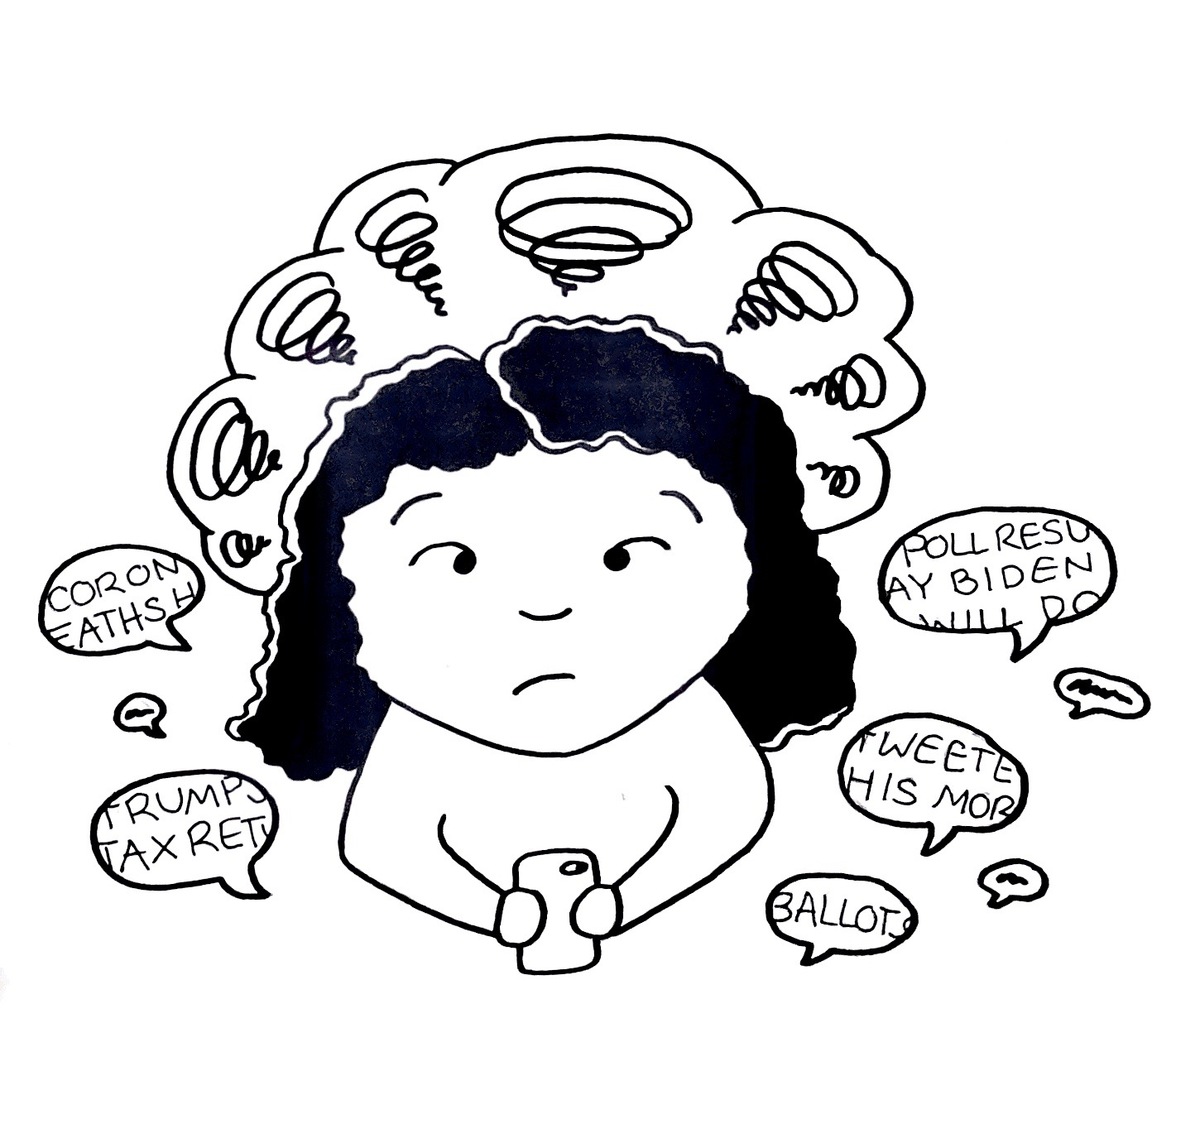 Woman looking anxious with speech bubbles surrounding her